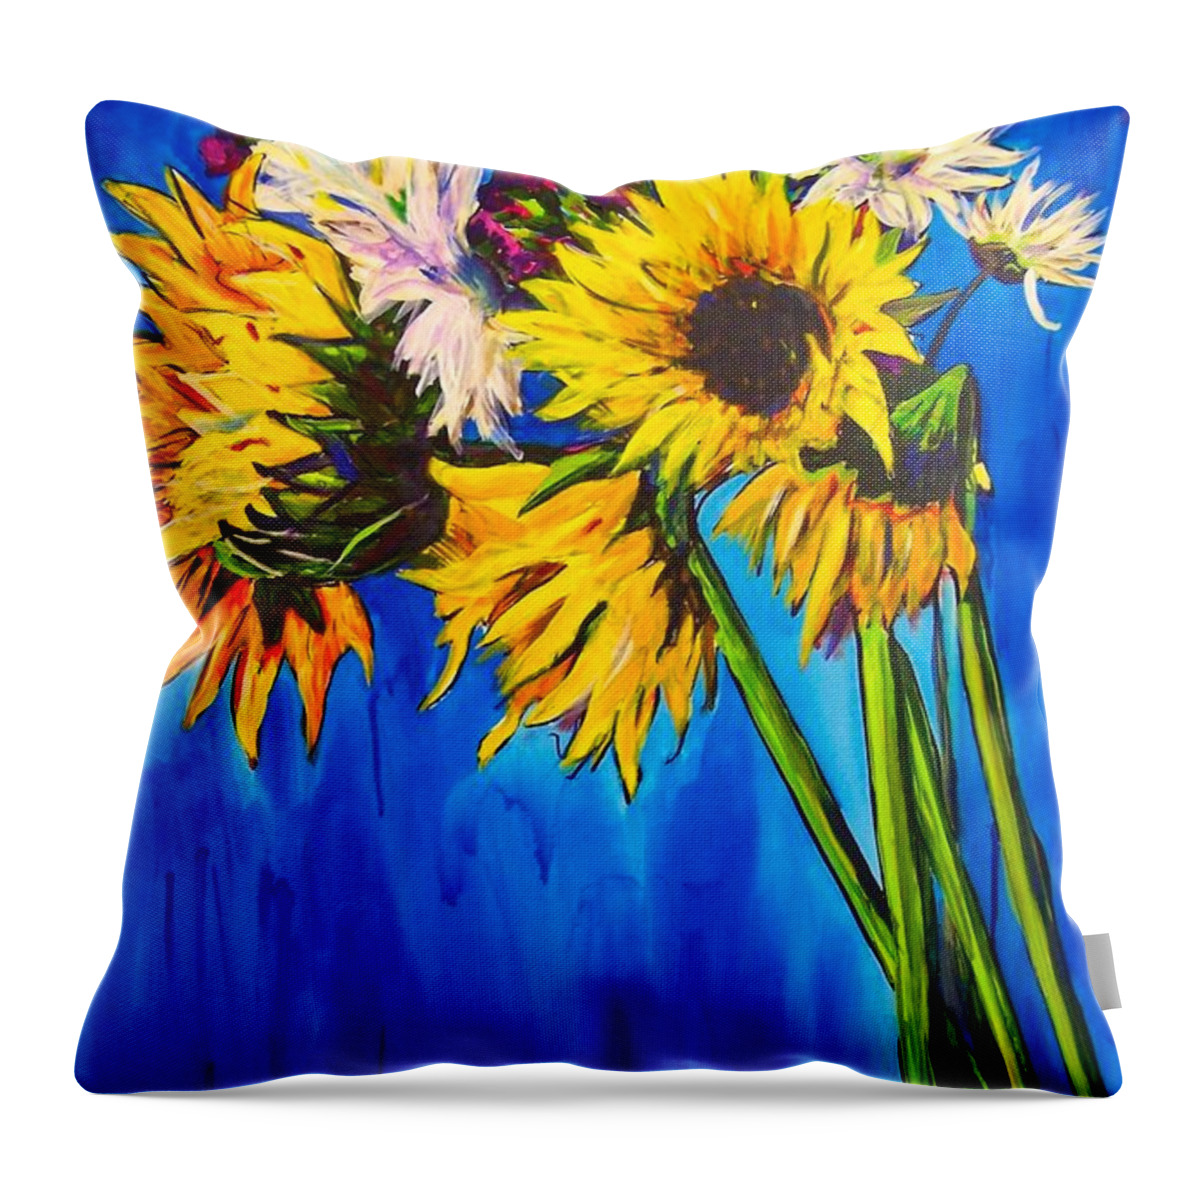 Floral Throw Pillow featuring the painting Sunflower Bouquet by Catherine Gruetzke-Blais